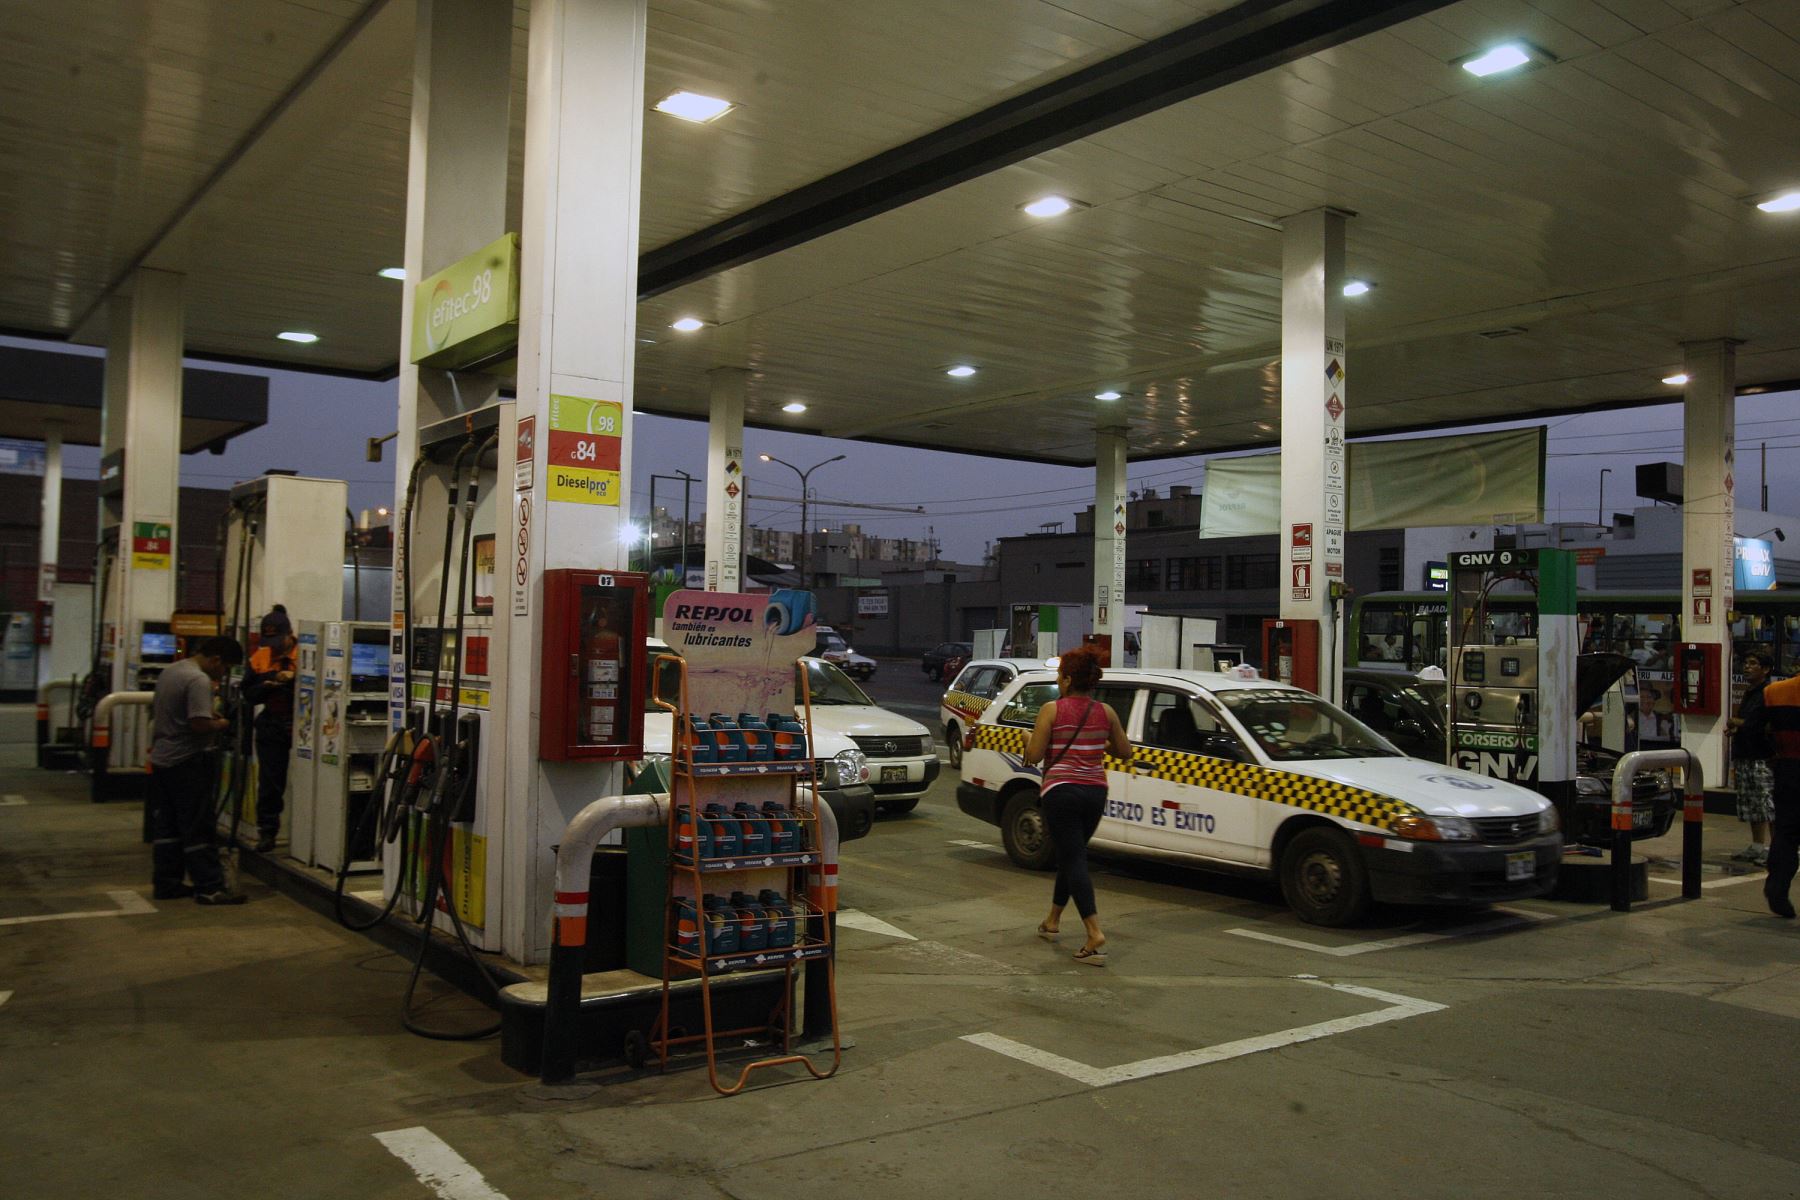 Users report shortages and higher prices of LPG in various taps in Lima